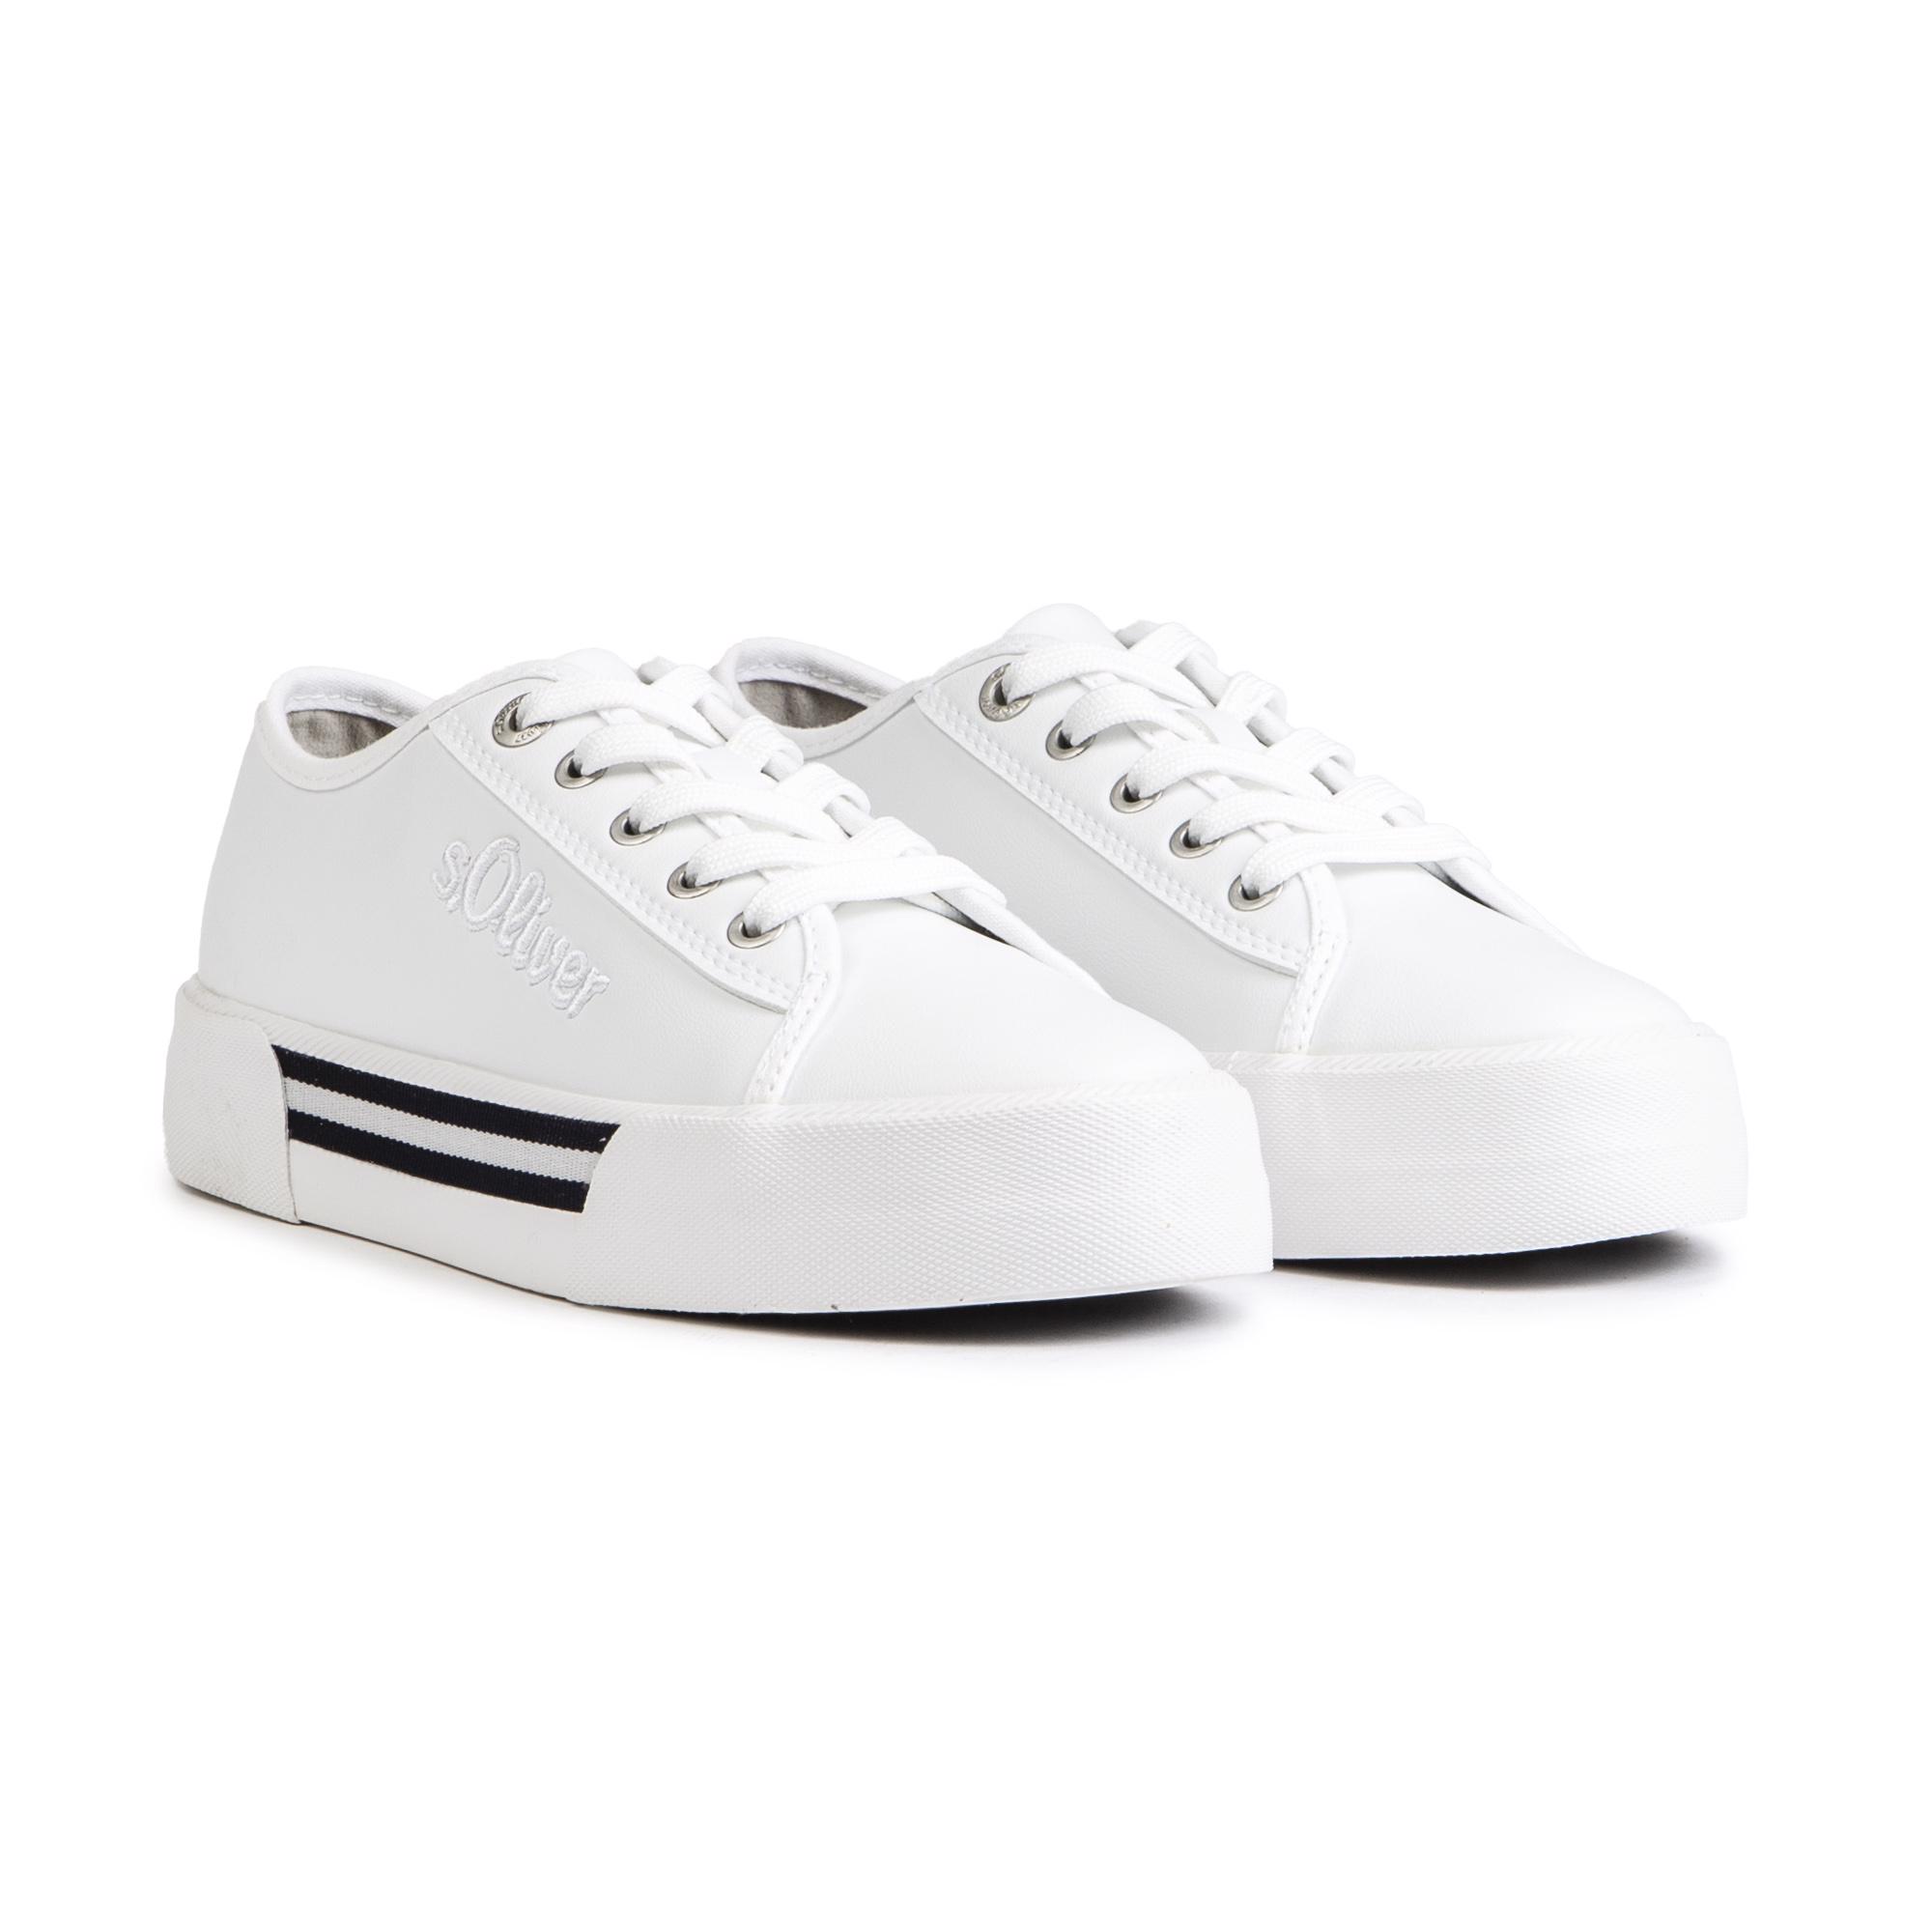 S OLIVER Womens 23678 Platforms Trainers White